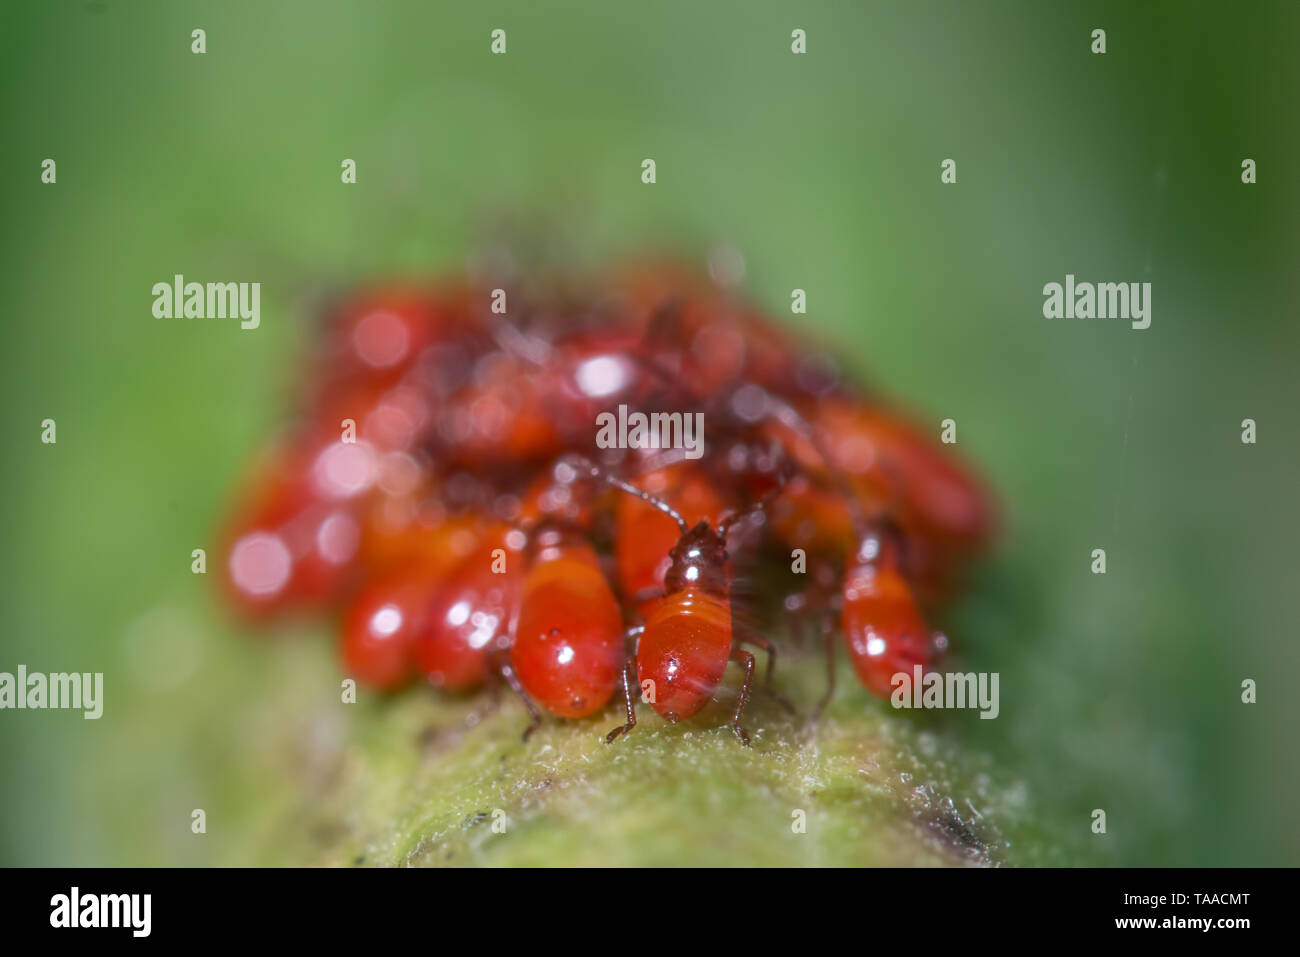 Closeup macro of bright red aphids (possibly brown ambrosia aphids) on a green plant stem in Governor Knowles State Forest in Northern Wisconsin Stock Photo